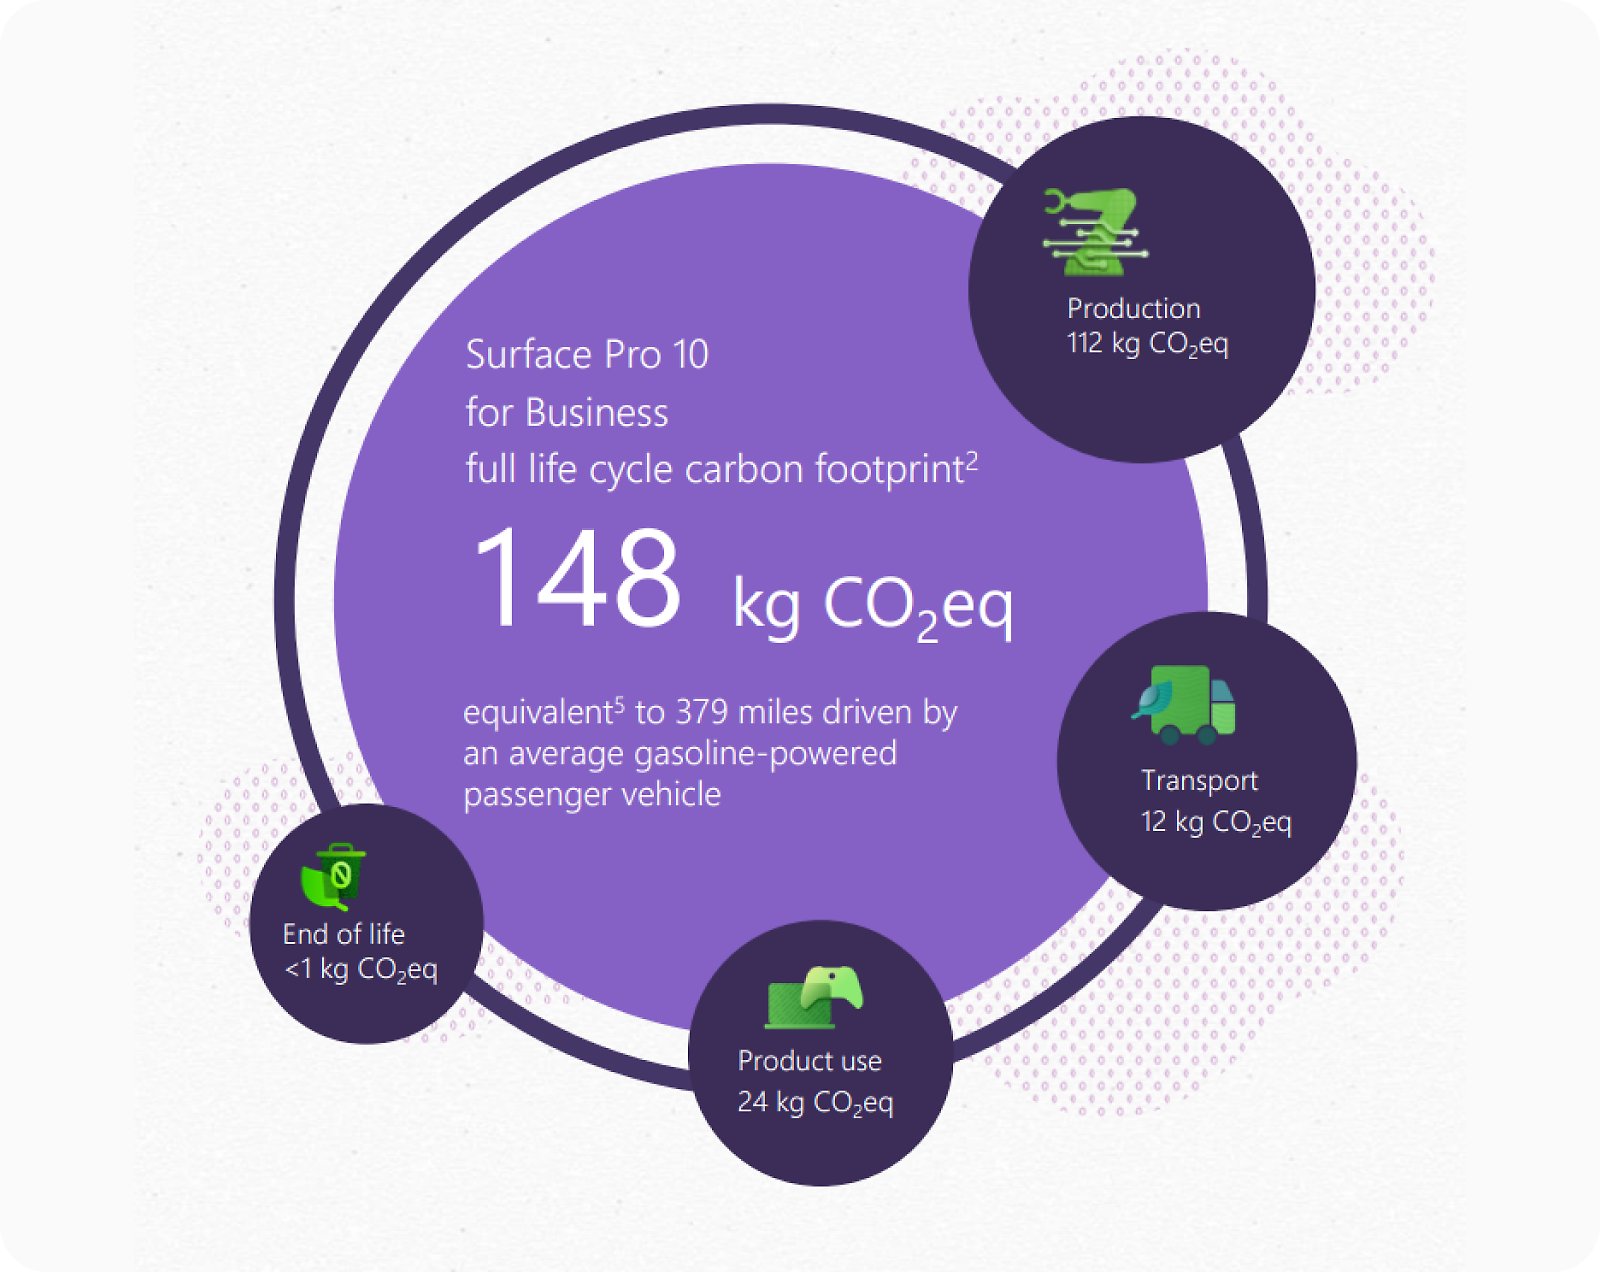 A circular graphic showing the Surface Pro 10 for Business has a full life cycle carbon footprint of 148 kg CO2eq: Production (112 kg)